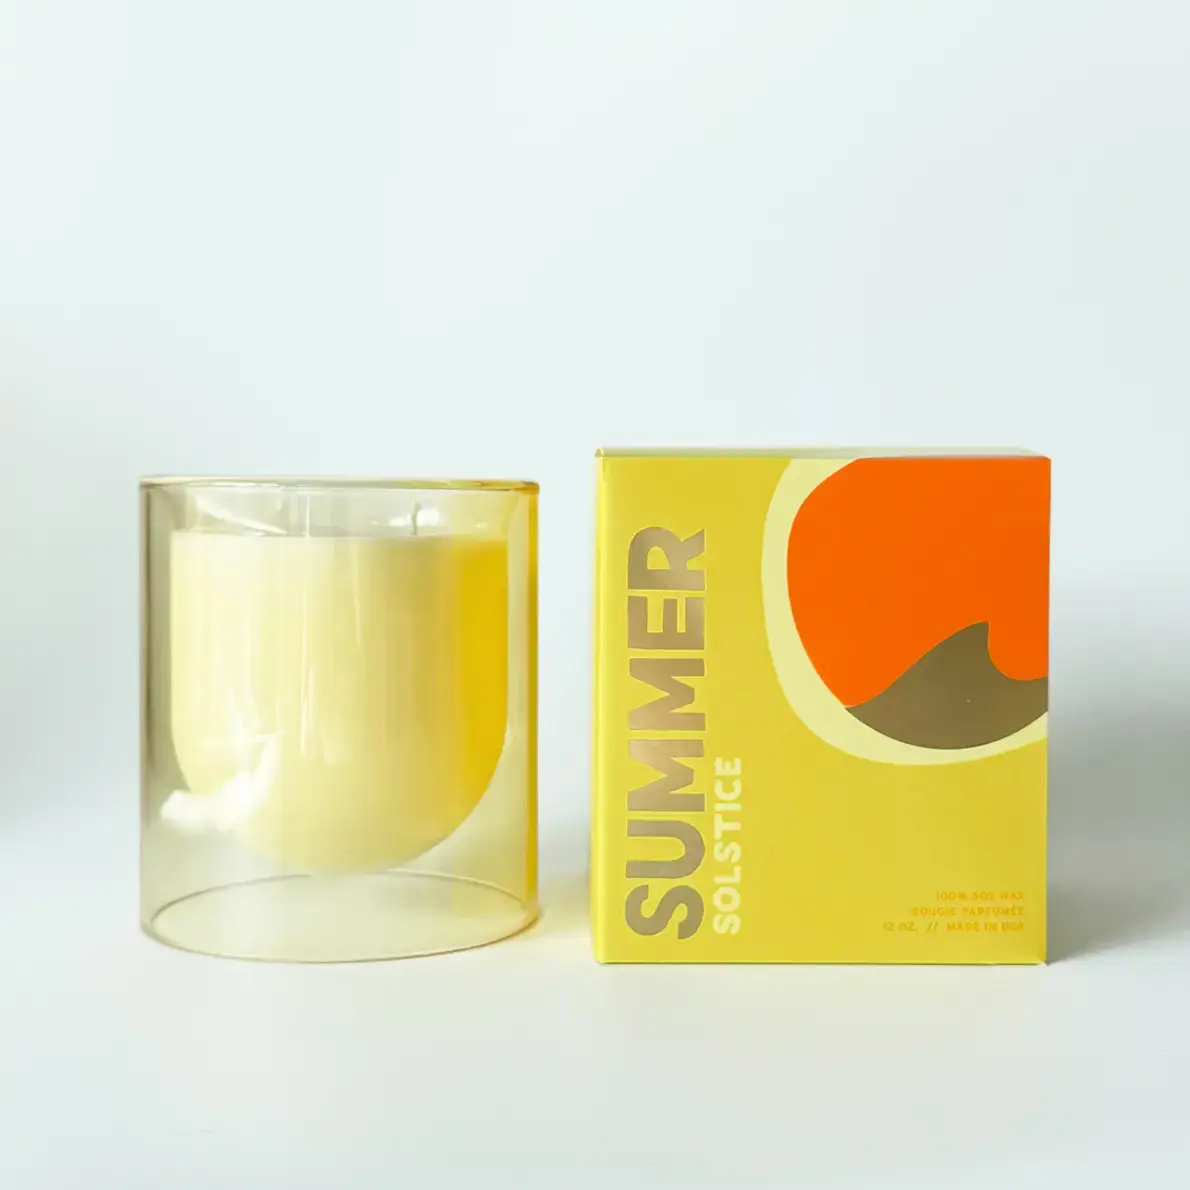 Botanica - BOT Botanica - Summer Solstice Double Wick Candle Four Seasons Collection